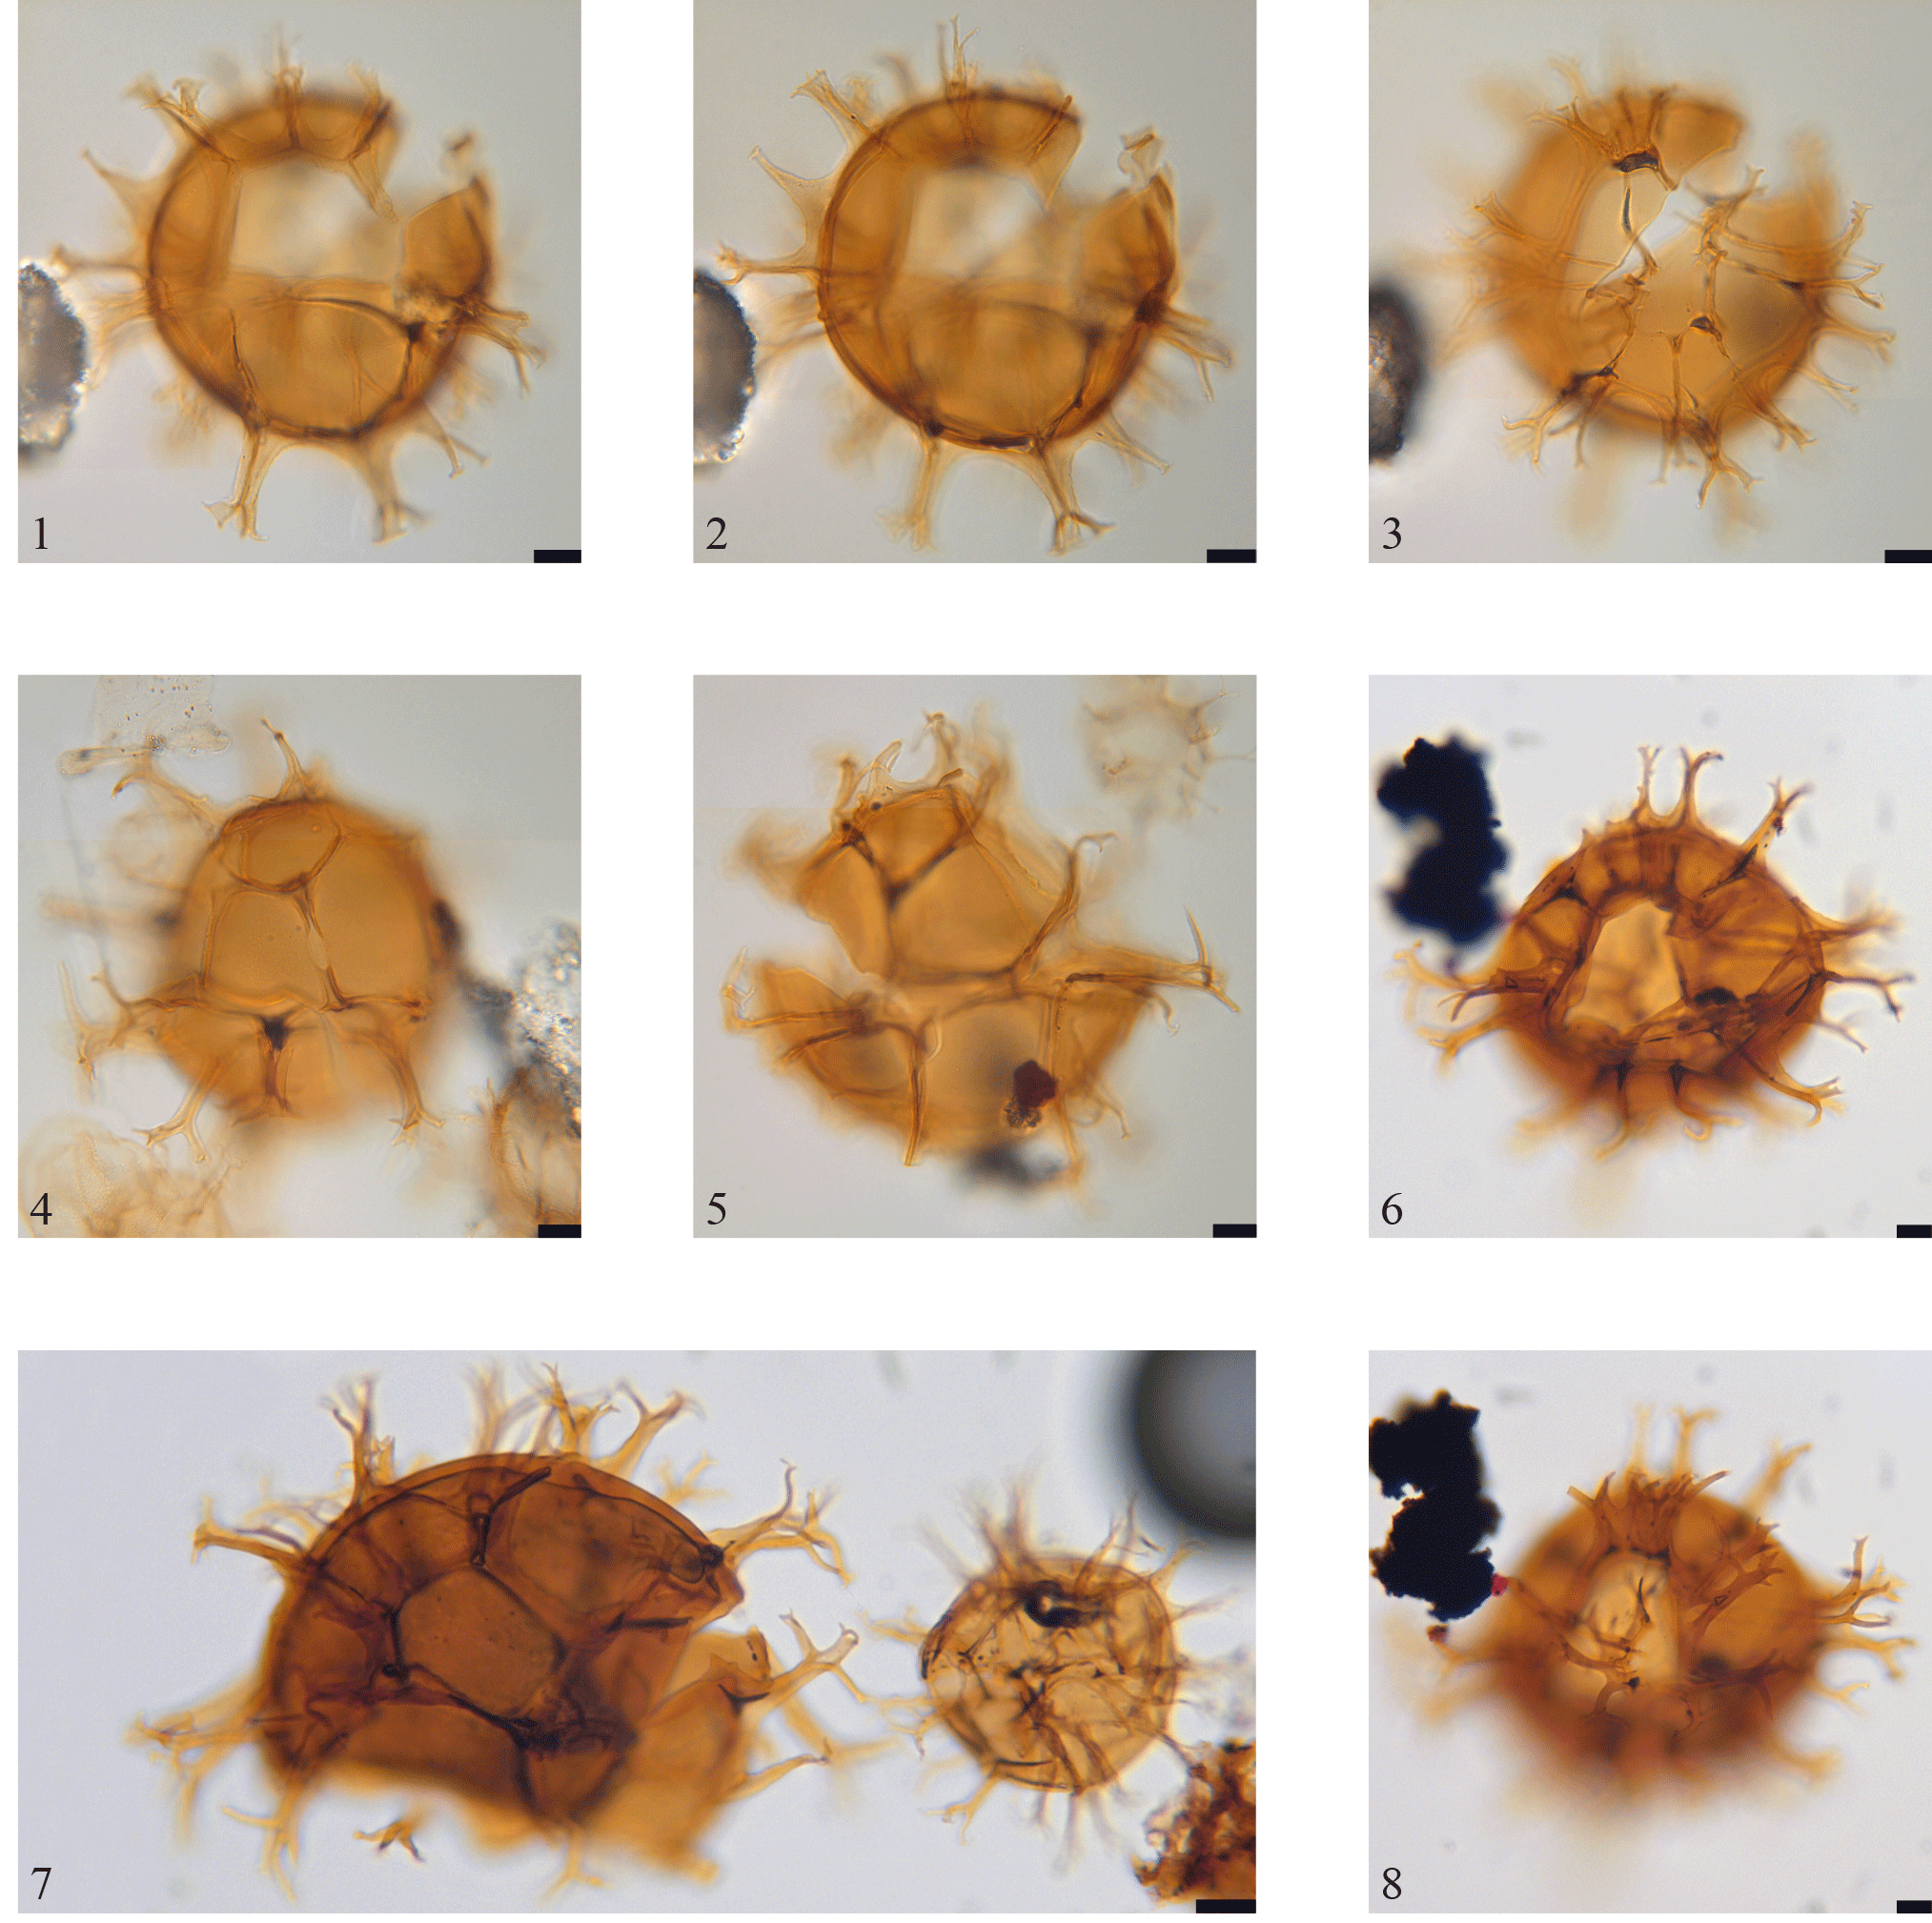 JM - Additional new organic-walled dinoflagellate cysts from two ...